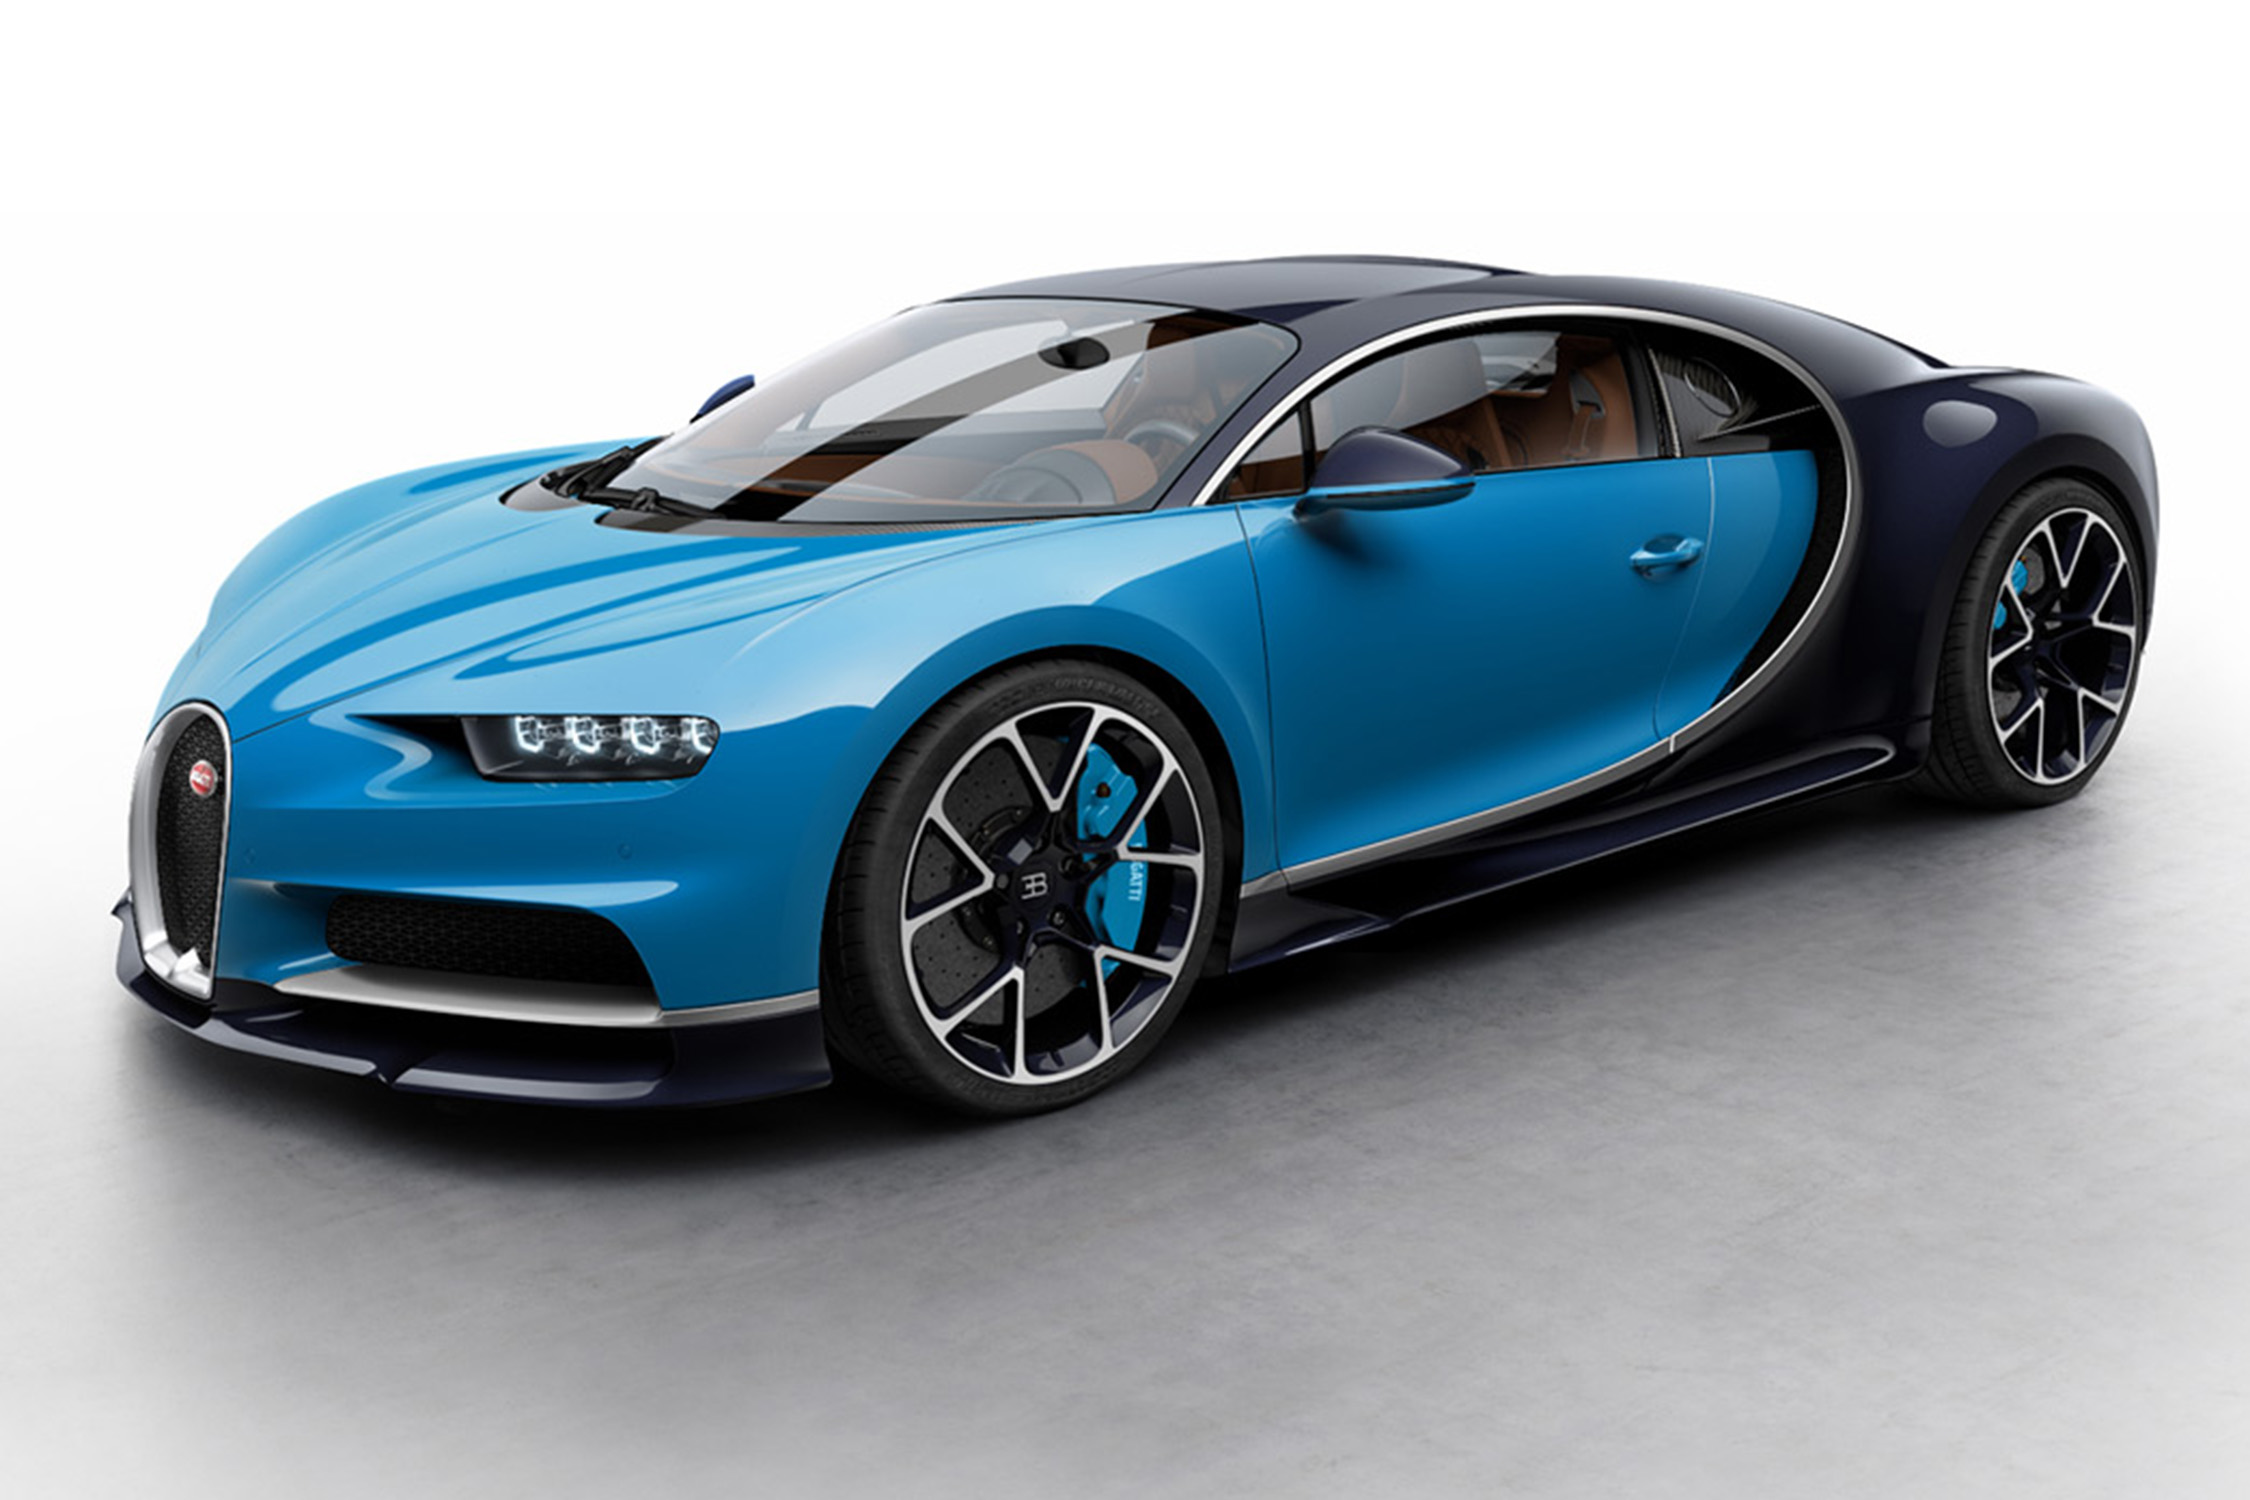 The cars of The Grand Tour season 2 - Bugatti Chiron The replacement for the Bugatti Veyron has some big, expensive, over-engineered shoes to fill. So, as you’d expect, Bugatti hasn’t been half-hearted in its creation of this 8-litre, quad turbo, W16-powered, 1479bhp missile with diamonds in the speakers and a limited — limited! — top speed of 261mph. You’ll be pleased to know Jeremy’s test is equally lavish.